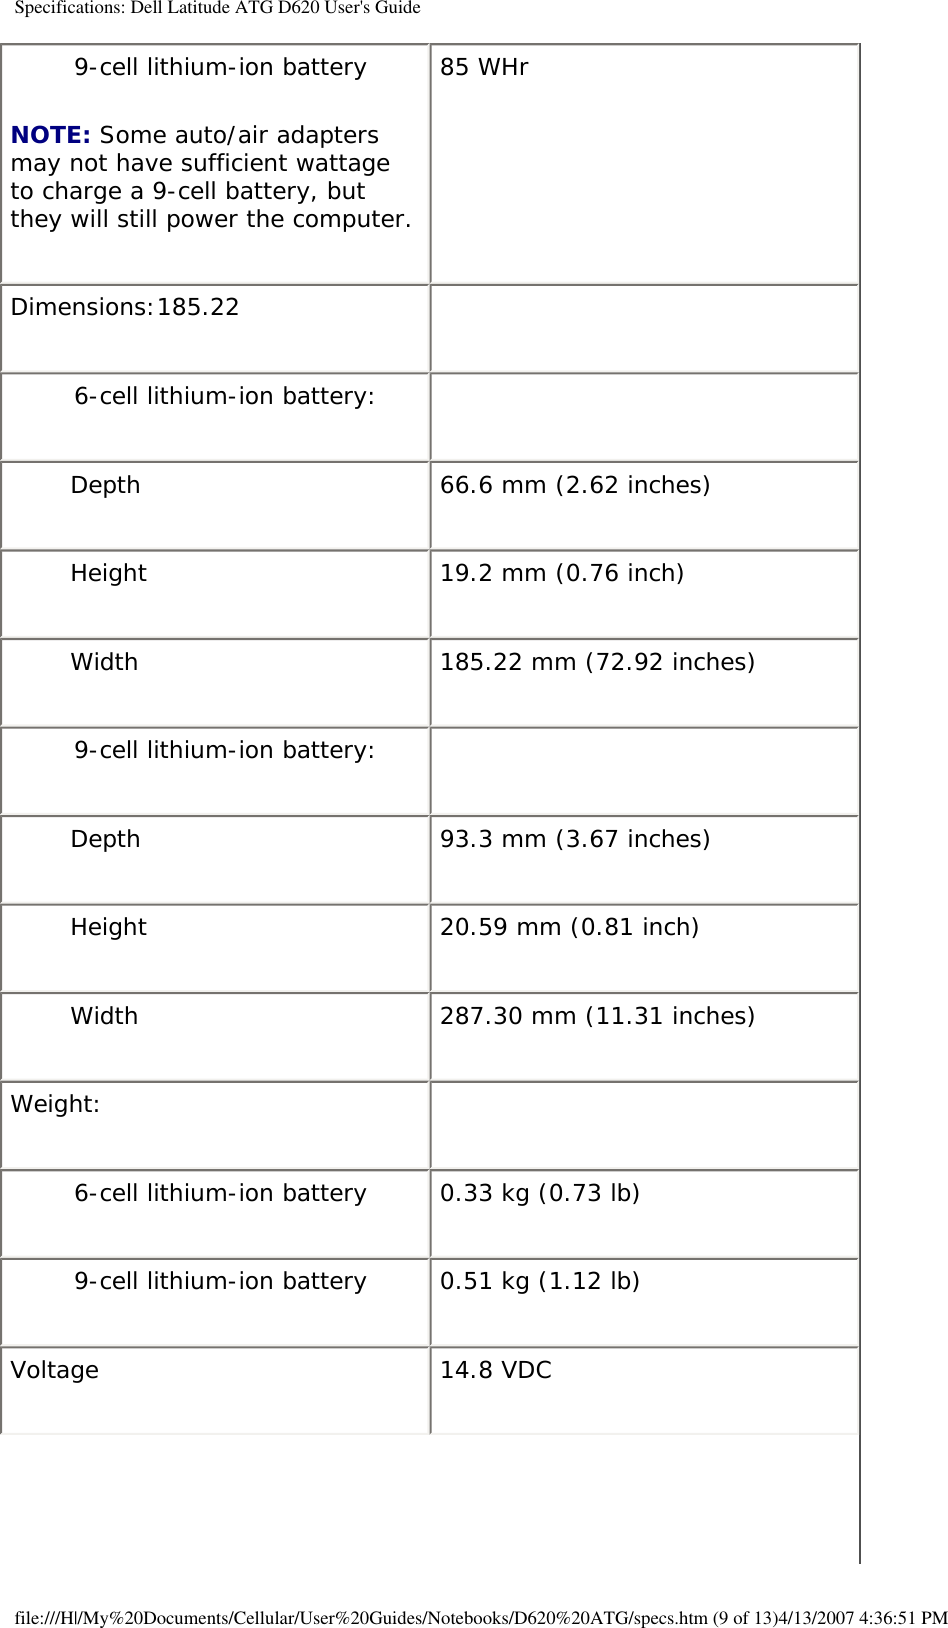 Specifications: Dell Latitude ATG D620 User&apos;s Guide9-cell lithium-ion batteryNOTE: Some auto/air adapters may not have sufficient wattage to charge a 9-cell battery, but they will still power the computer.85 WHr Dimensions:185.22  6-cell lithium-ion battery:  Depth 66.6 mm (2.62 inches)Height 19.2 mm (0.76 inch)Width 185.22 mm (72.92 inches)9-cell lithium-ion battery:  Depth 93.3 mm (3.67 inches)Height 20.59 mm (0.81 inch)Width  287.30 mm (11.31 inches)Weight:  6-cell lithium-ion battery 0.33 kg (0.73 lb)9-cell lithium-ion battery 0.51 kg (1.12 lb)Voltage 14.8 VDCfile:///H|/My%20Documents/Cellular/User%20Guides/Notebooks/D620%20ATG/specs.htm (9 of 13)4/13/2007 4:36:51 PM